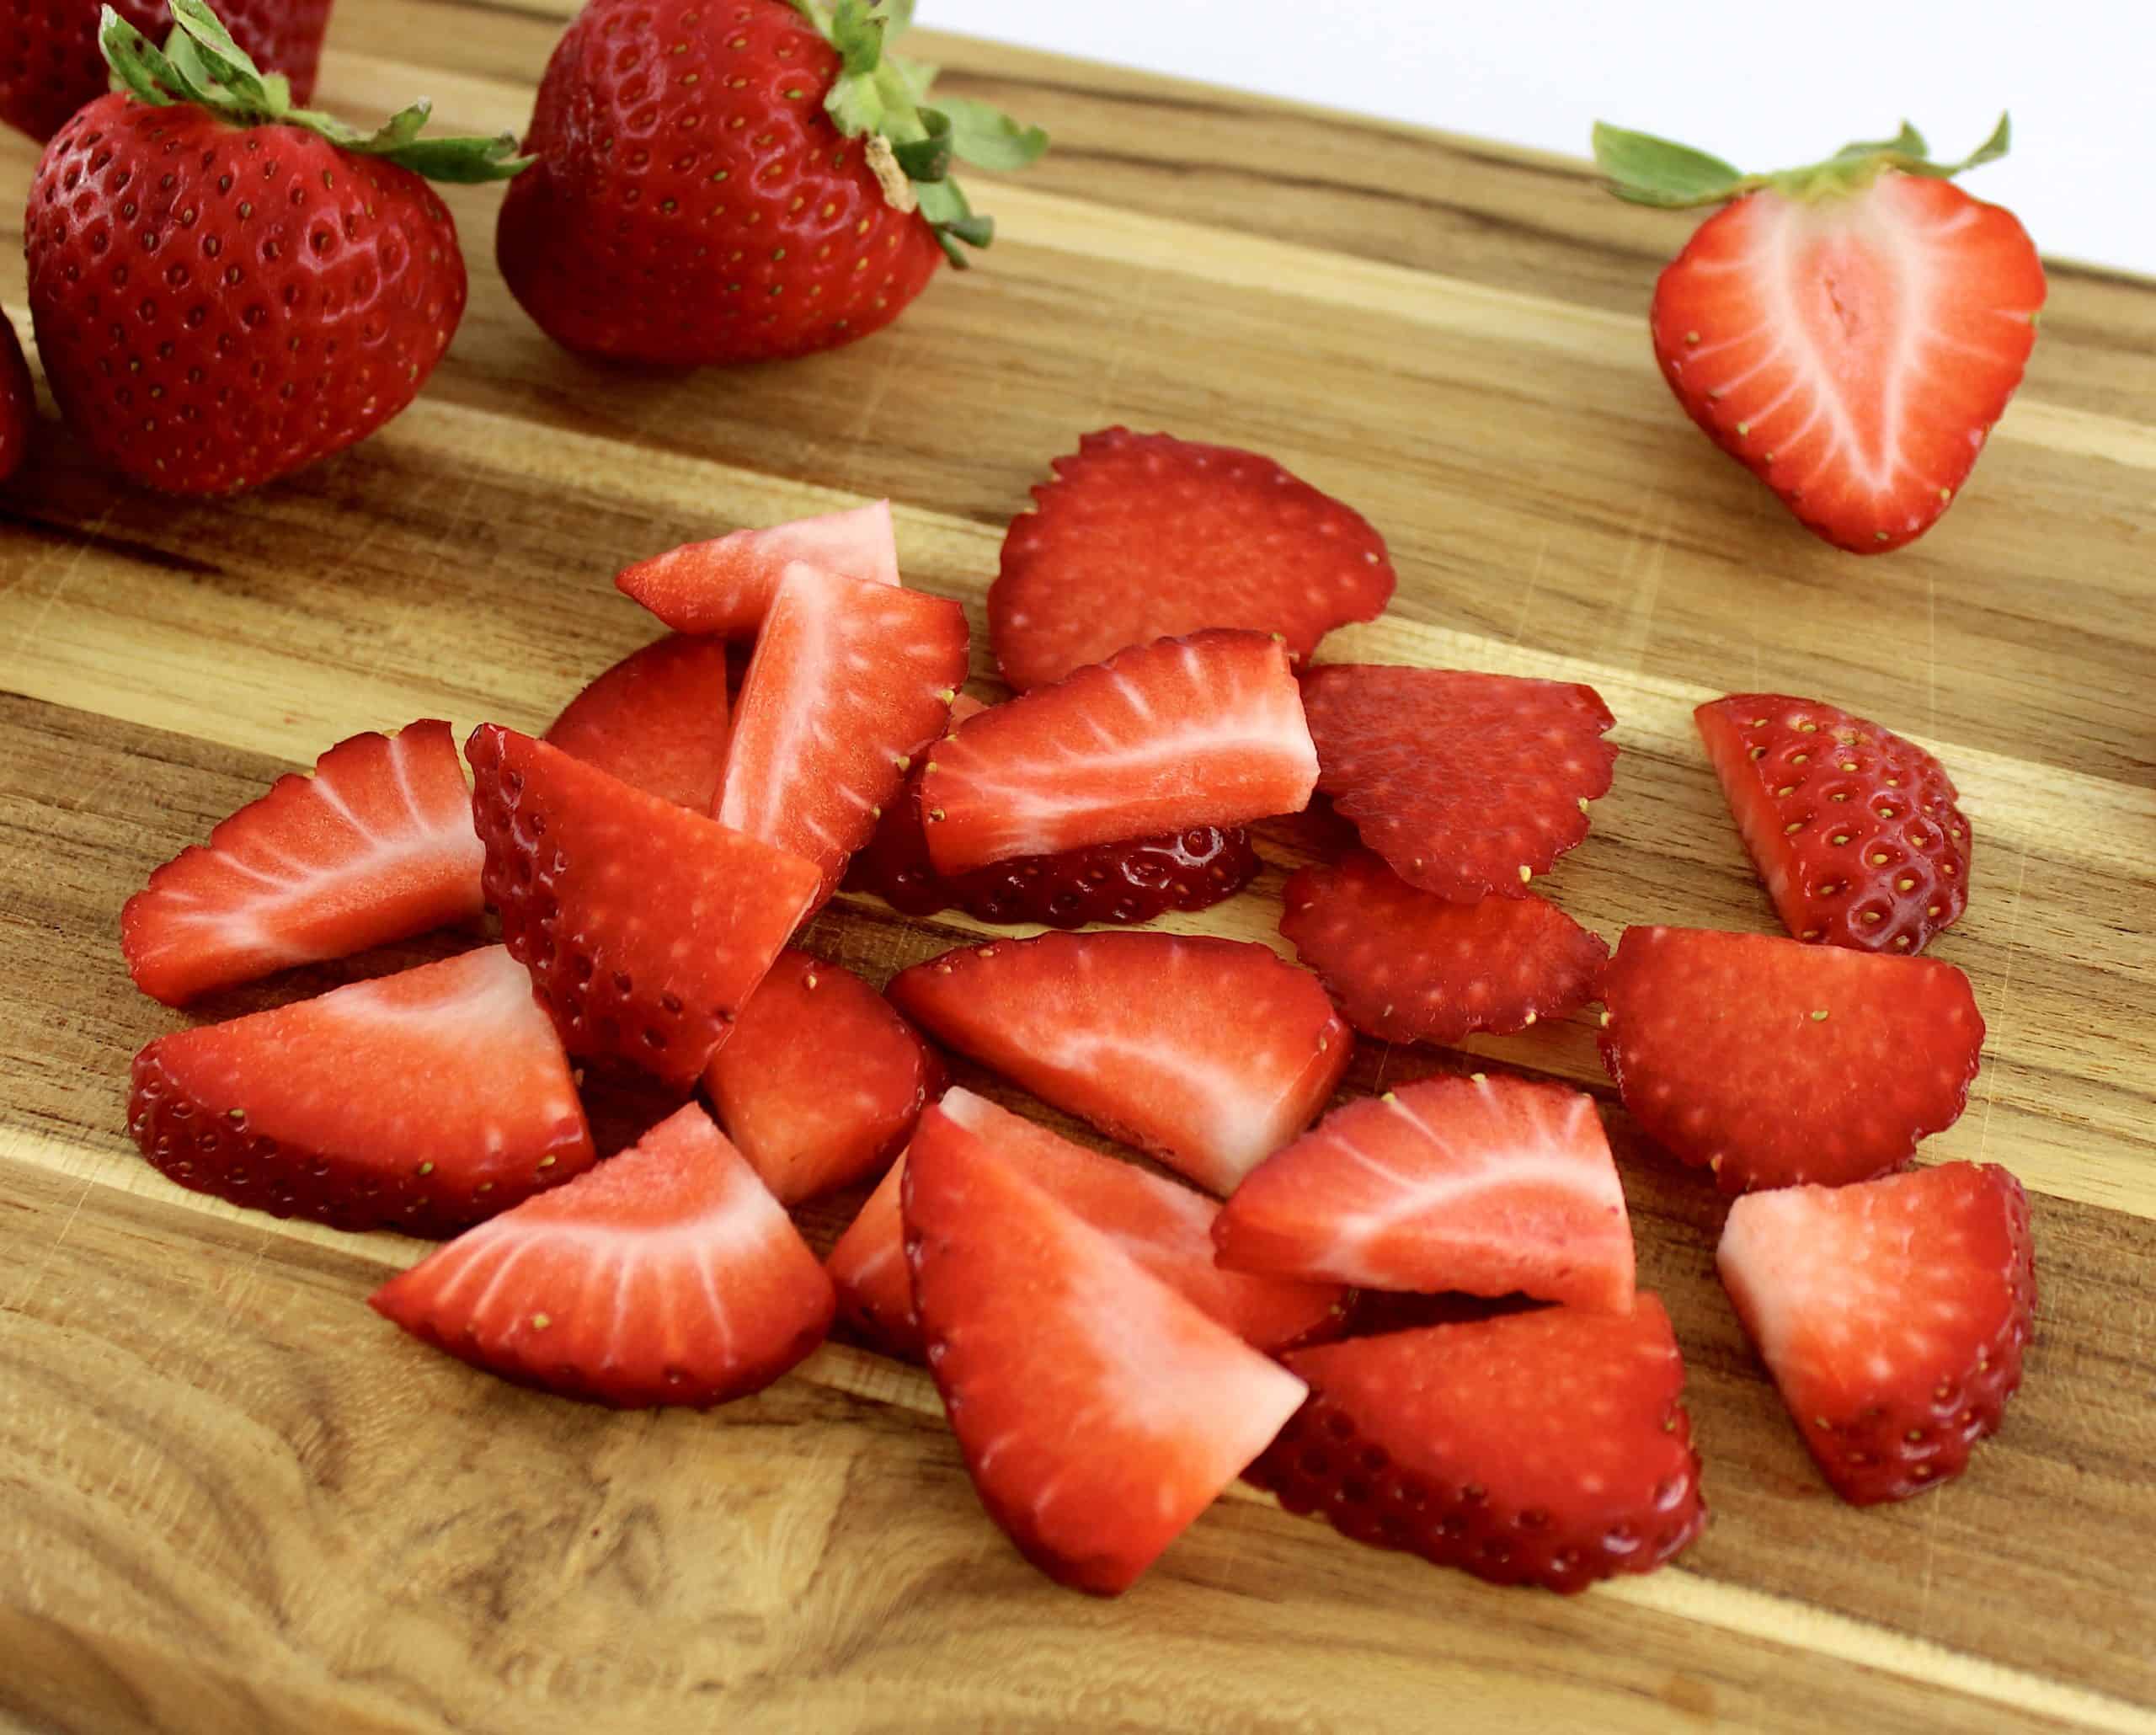 sliced and whole strawberries on cutting board